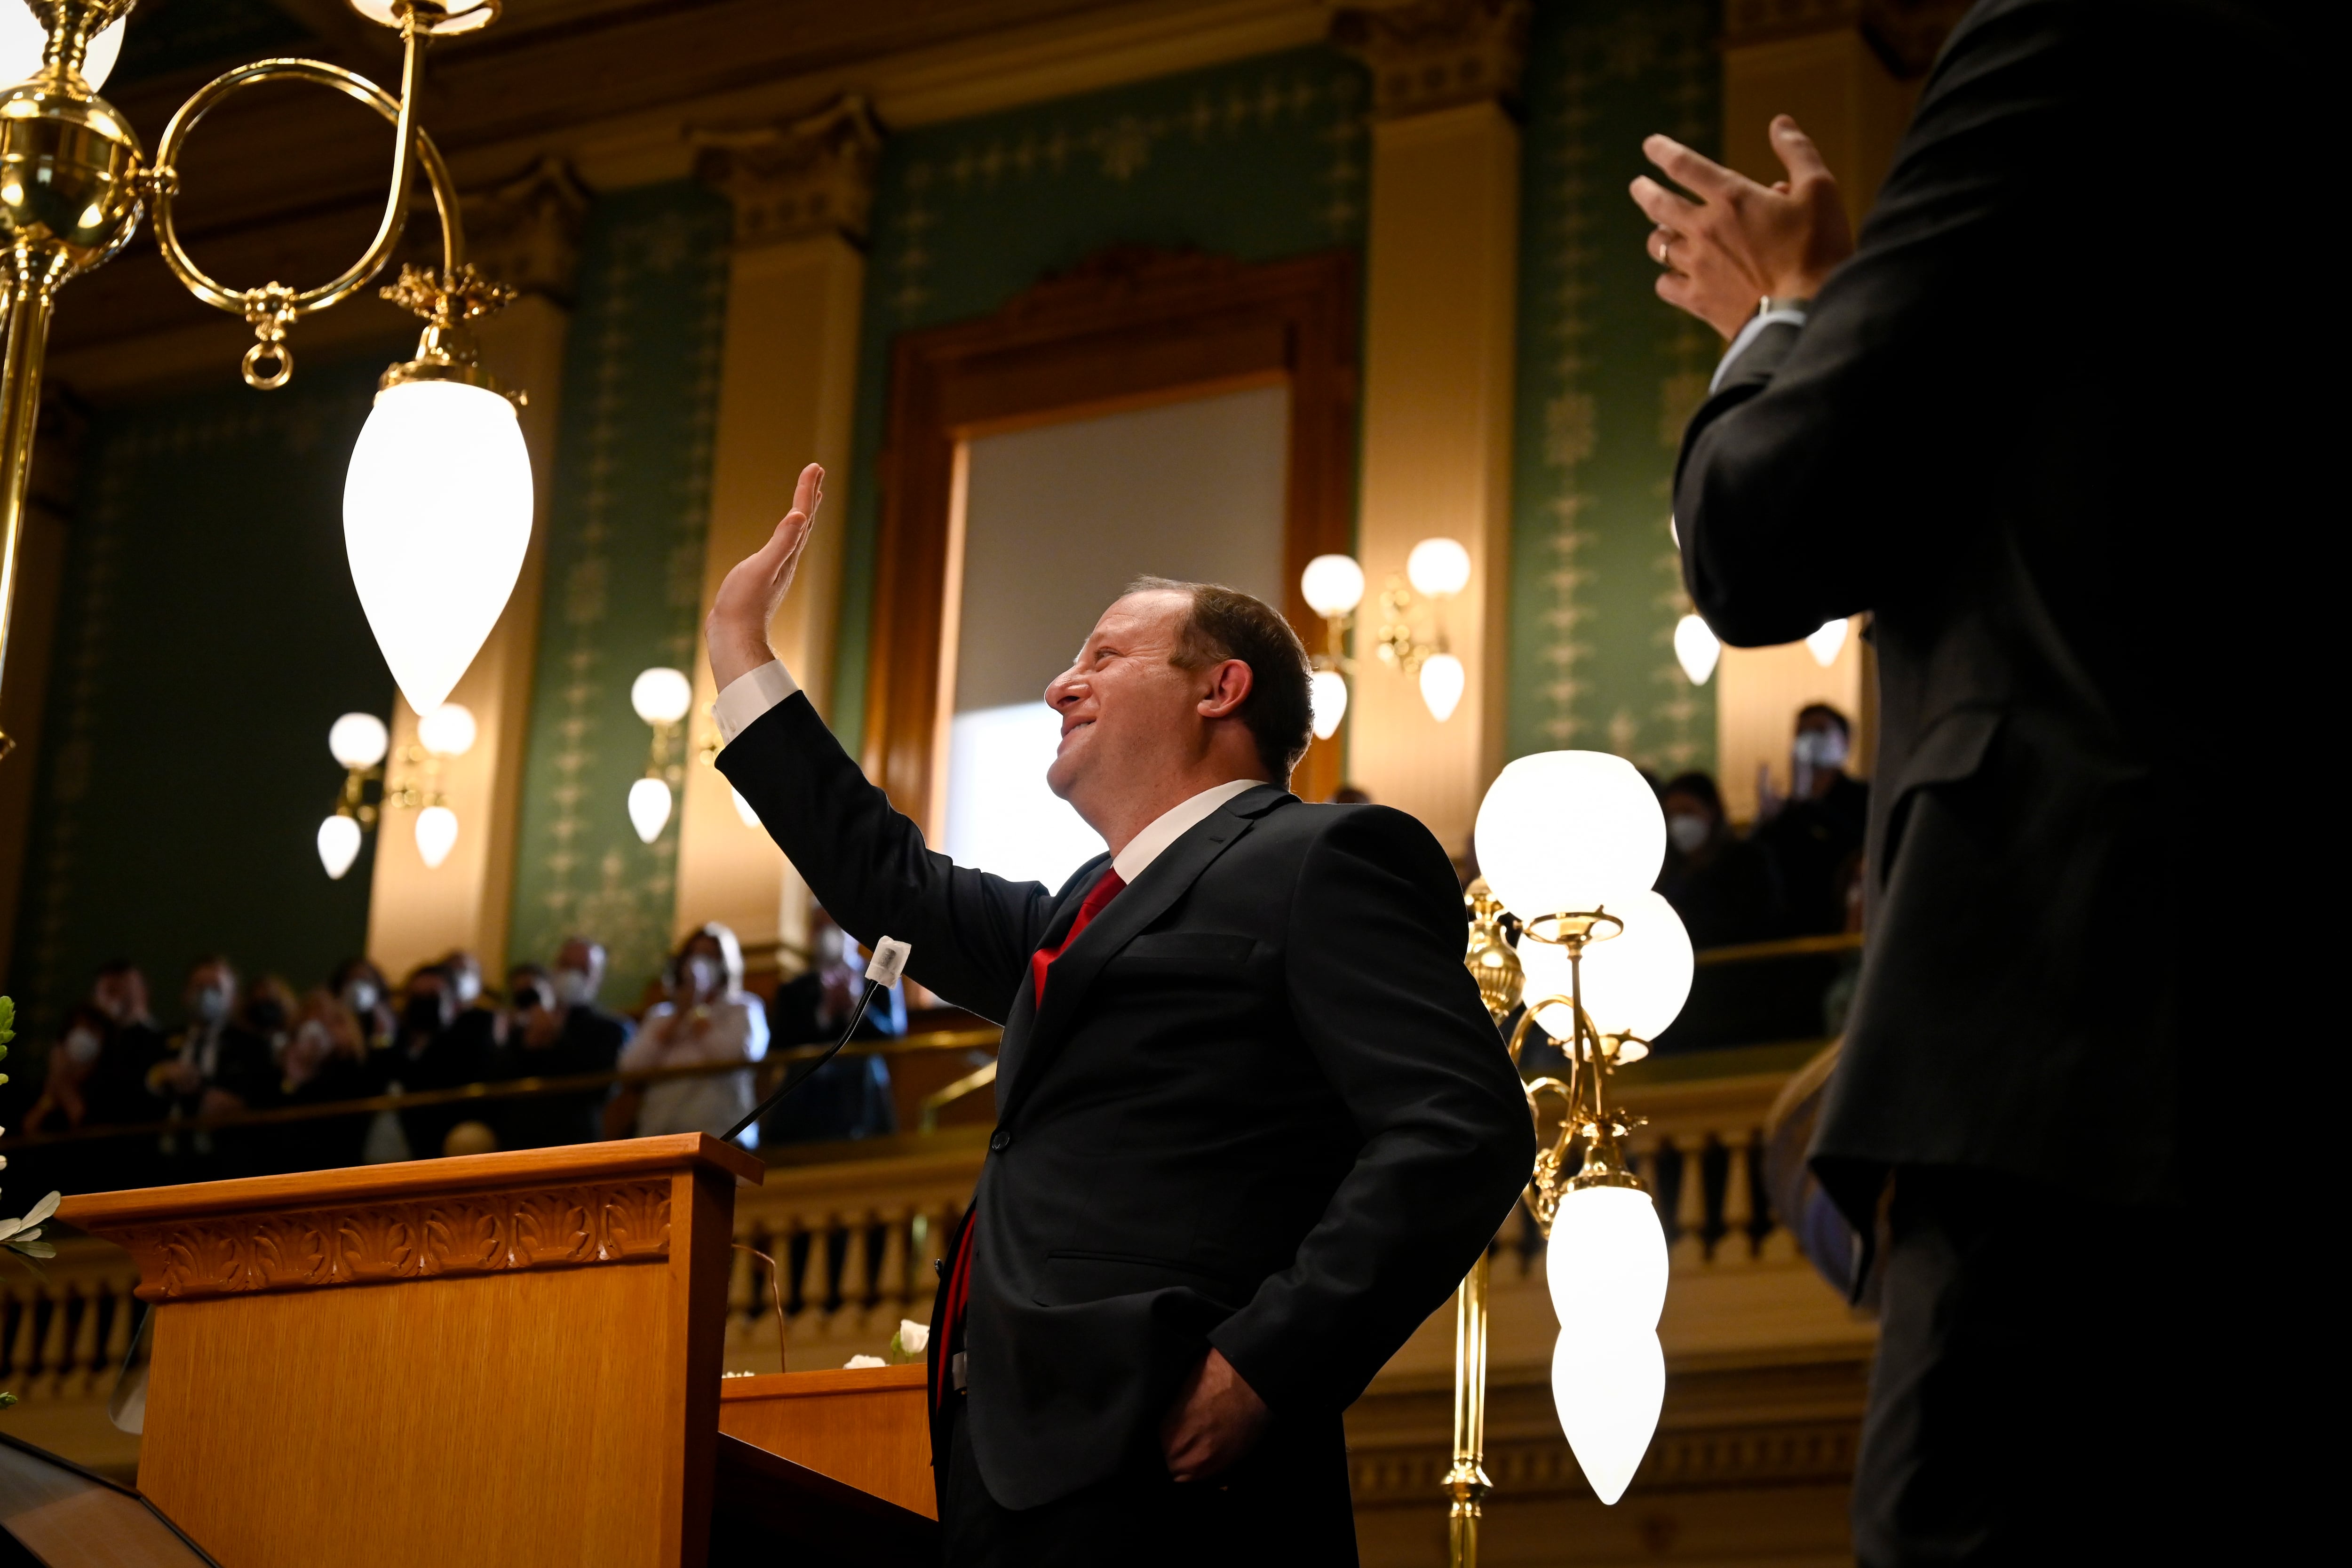 Colorado Gov. Jared Polis dressed in a black suit and red tie waves from the Colorado House chambers with lights and the green walls in the background.